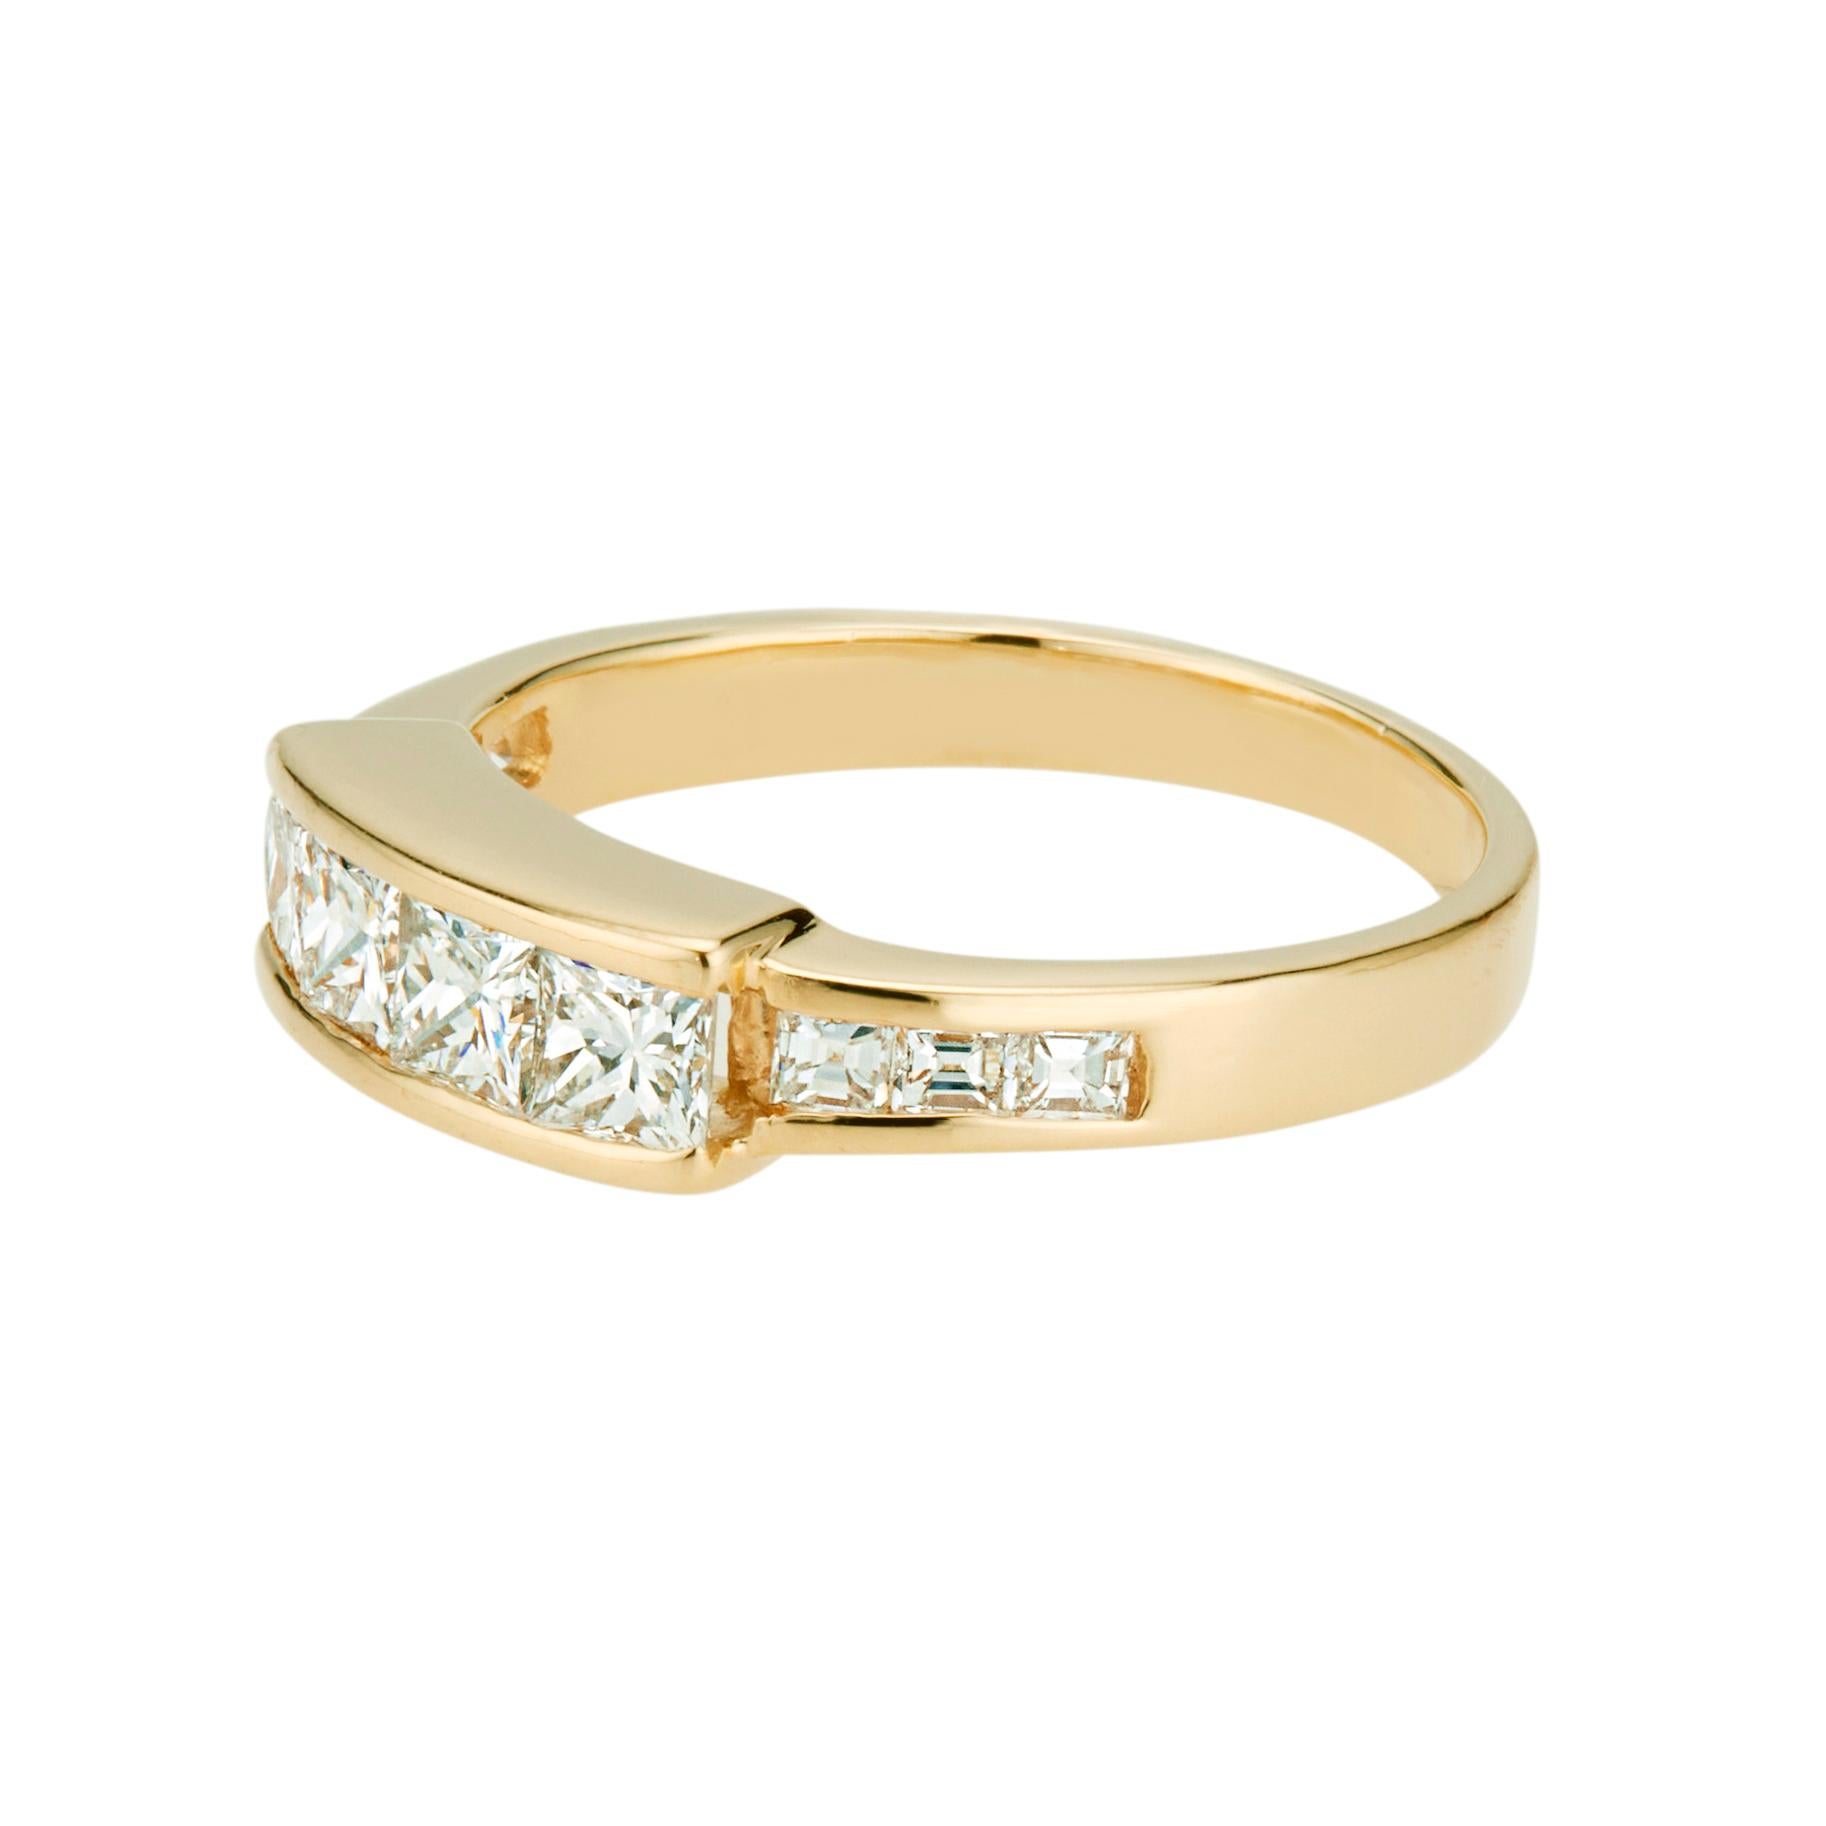 Diamond wedding band. 4 princess cut channel set diamonds in a 20k yellow gold setting with 6 step cut square accent diamonds. Circa 1970's

4 princess cut diamonds, G-H VS approx. .60cts
6 step cut square diamonds, G-H VS approx. .24cts
Size 5.25